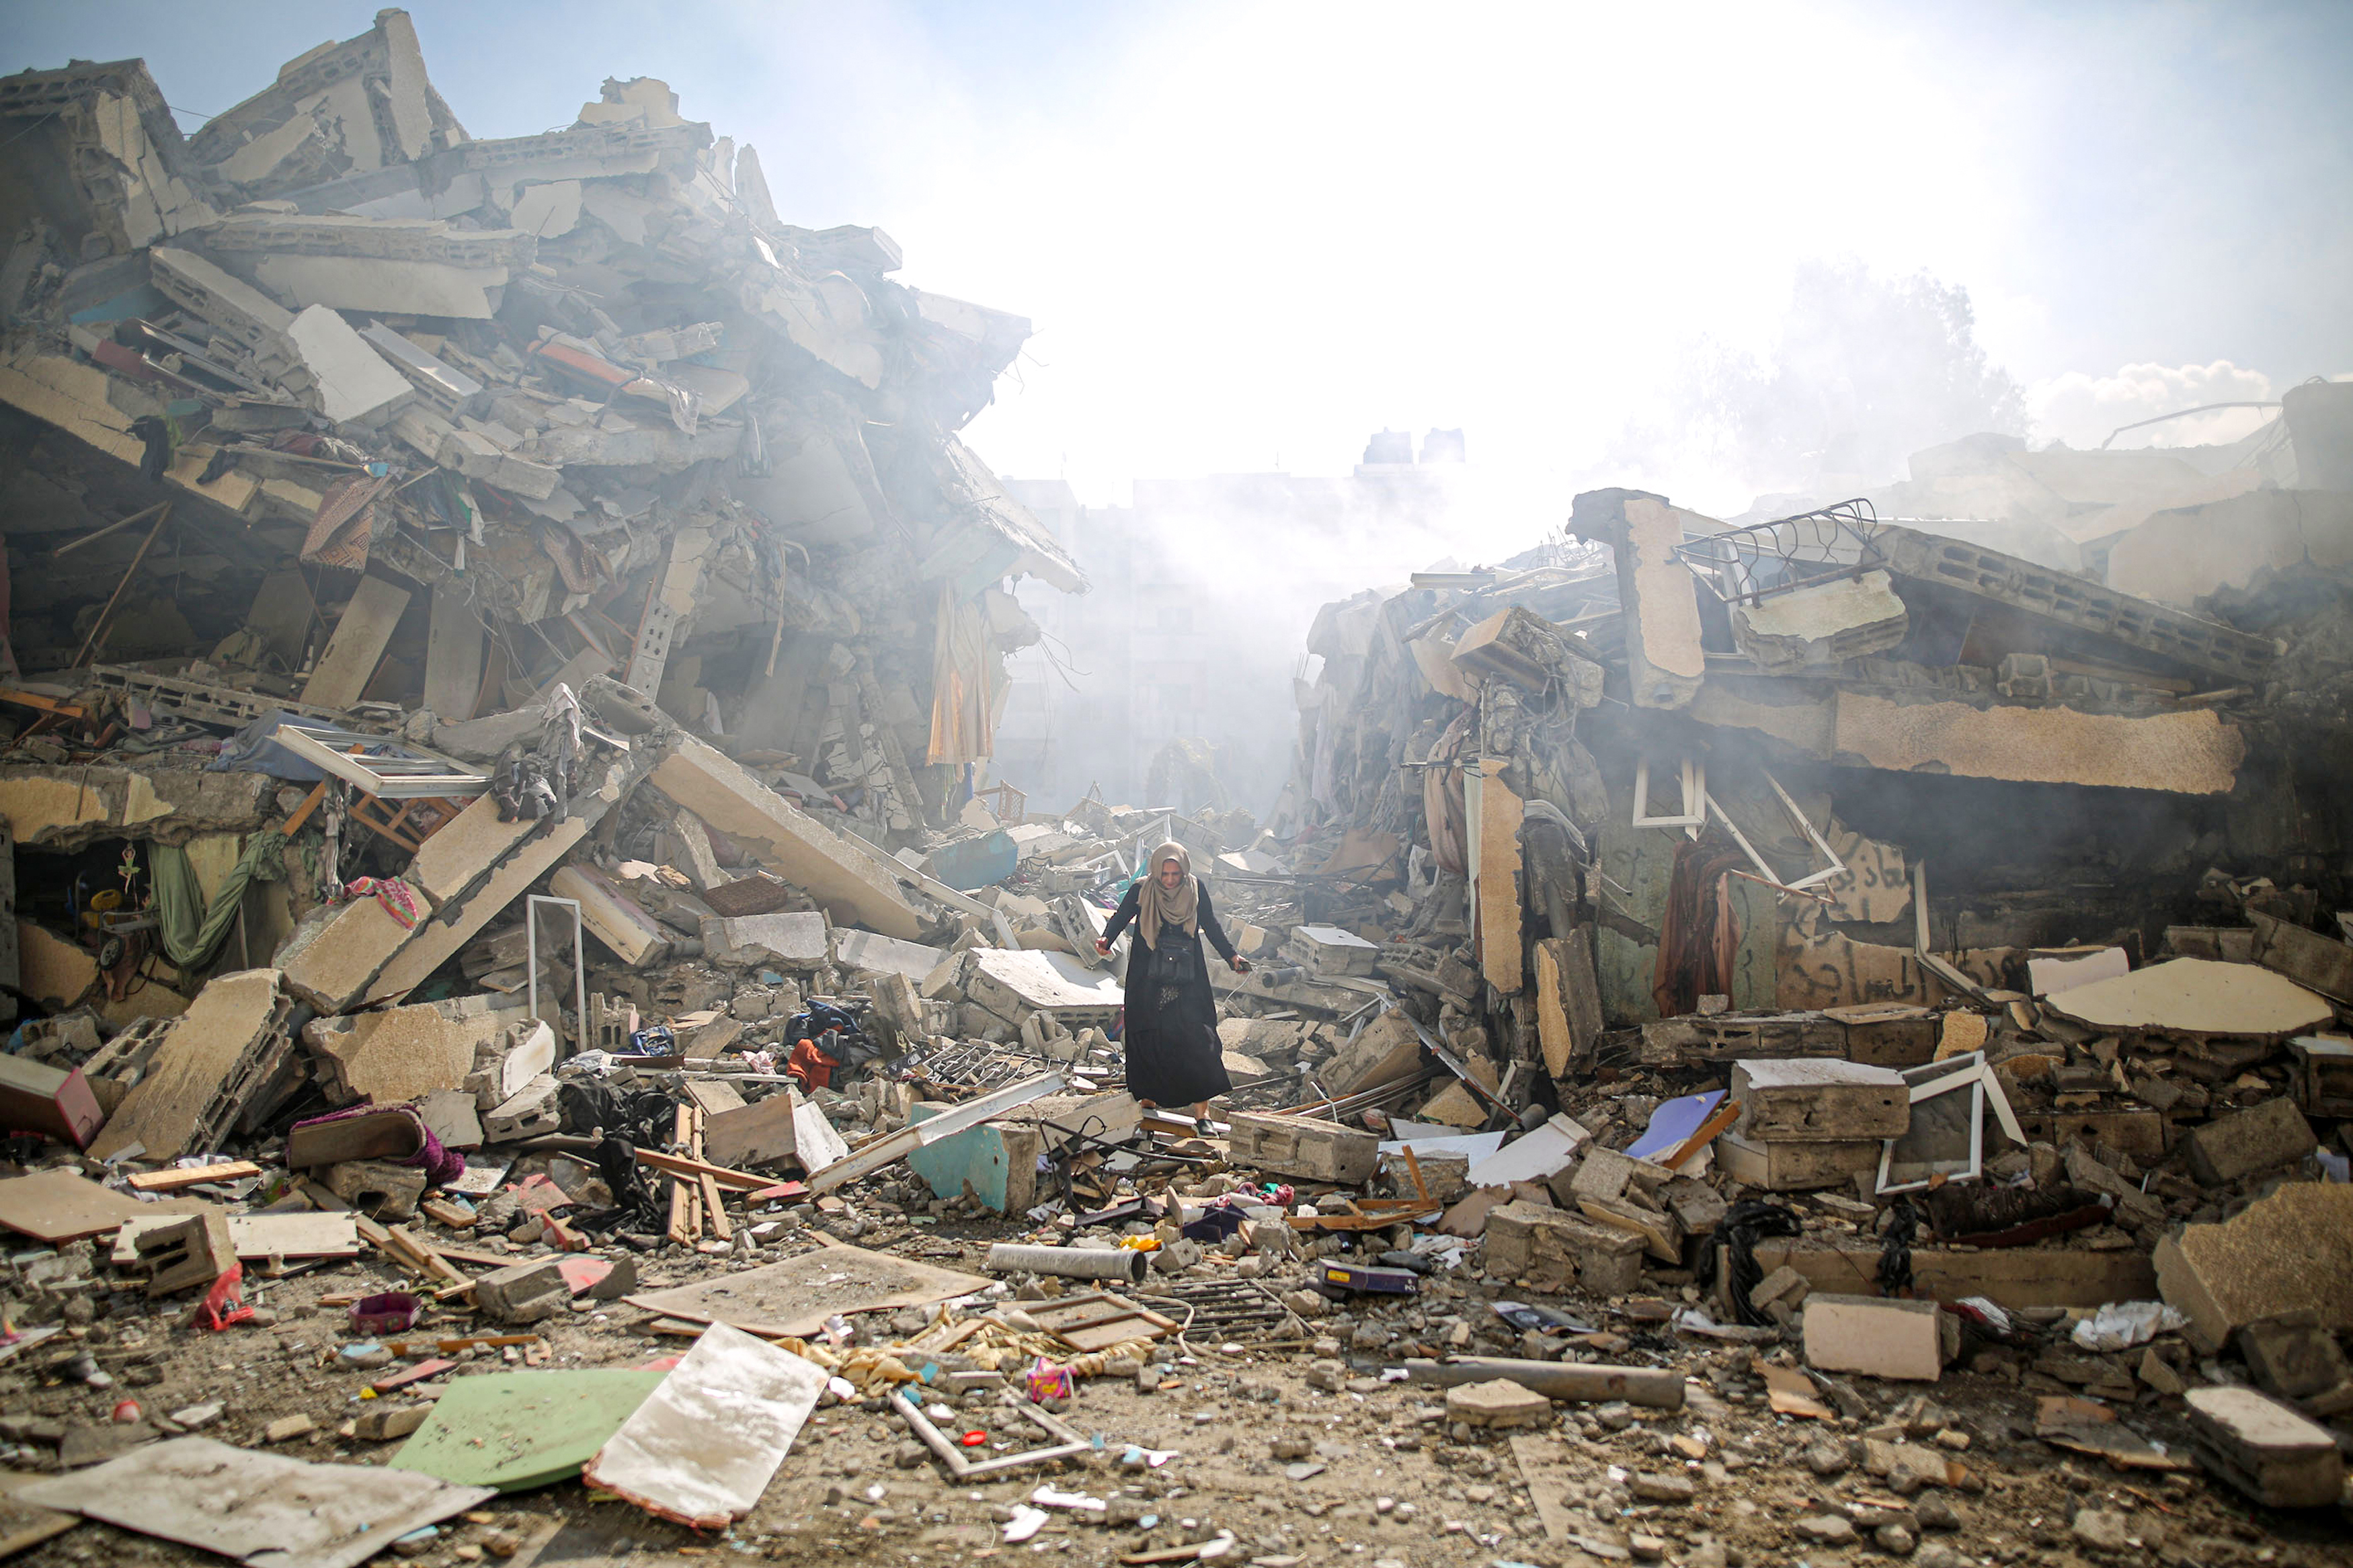 A person stands in the rubble of destroyed buildings, with rubble all over the street